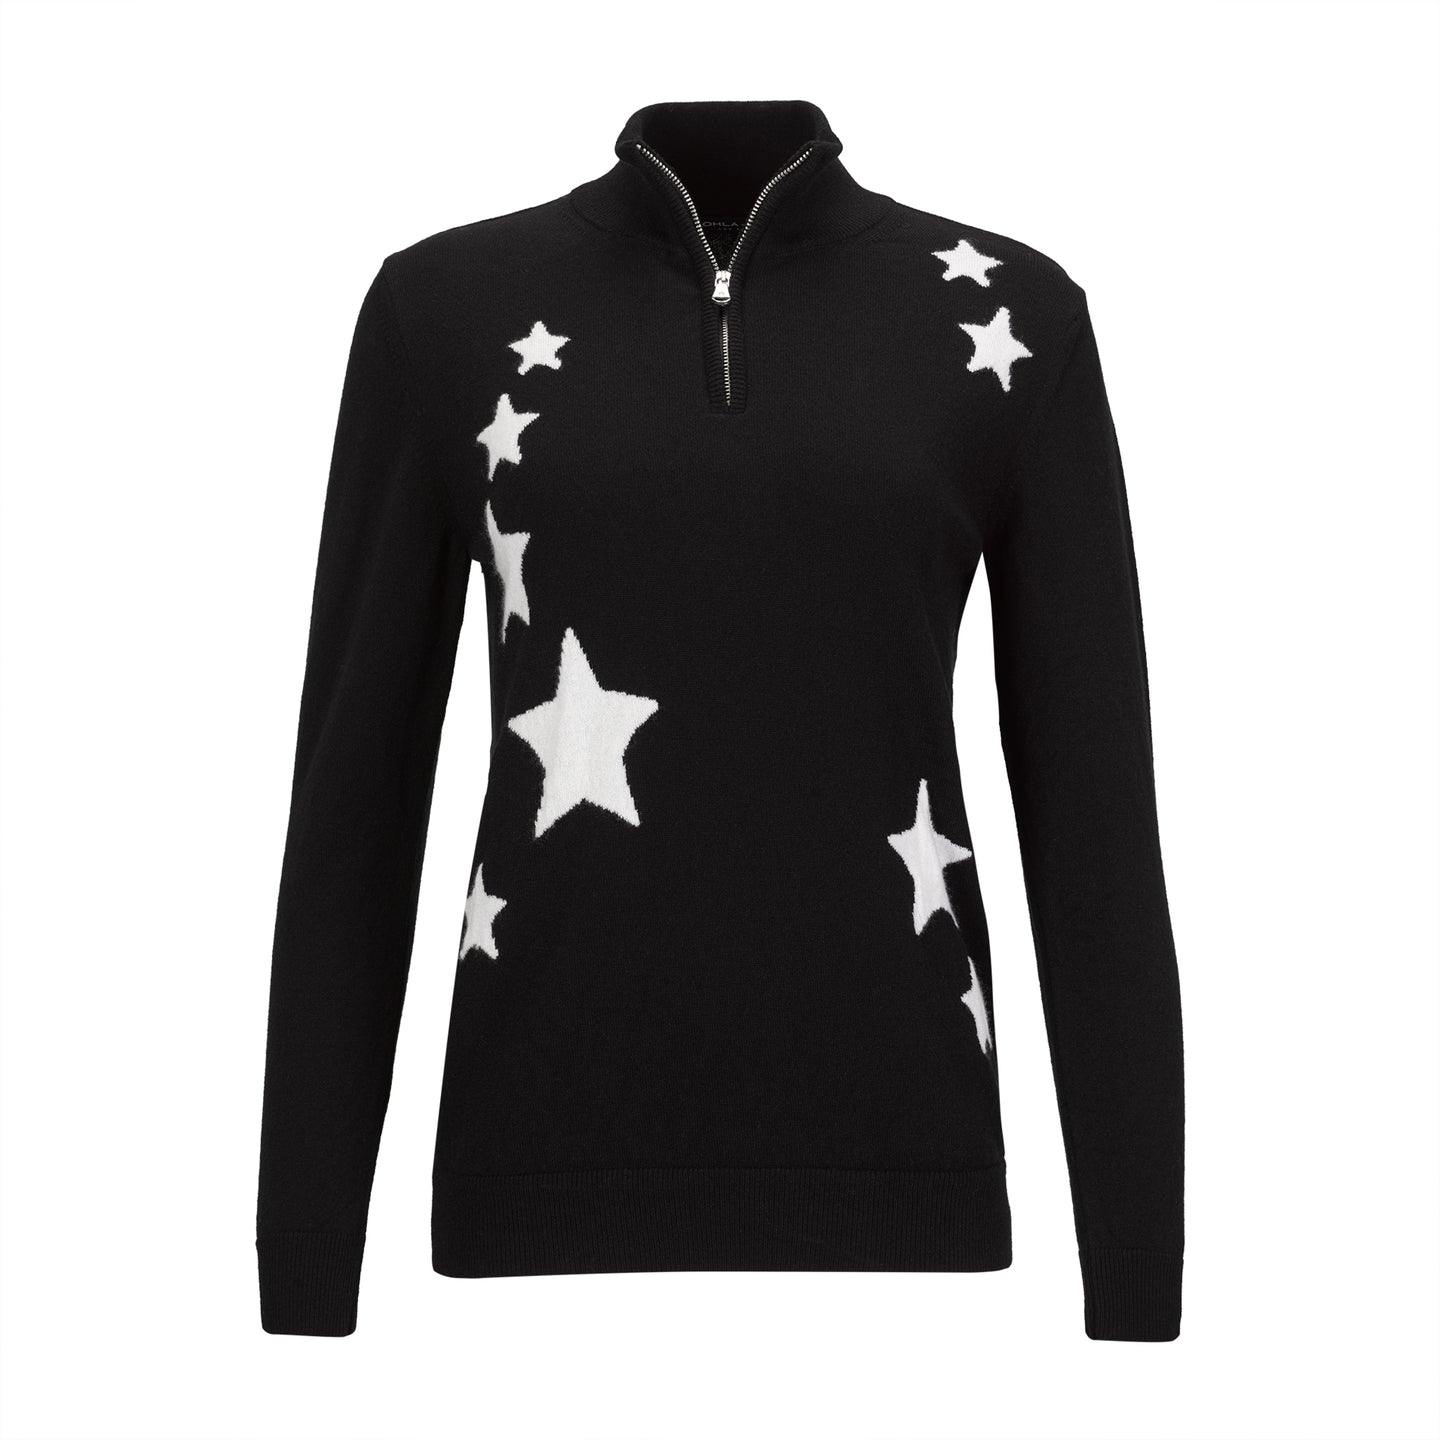 The Evening Stars Pullover